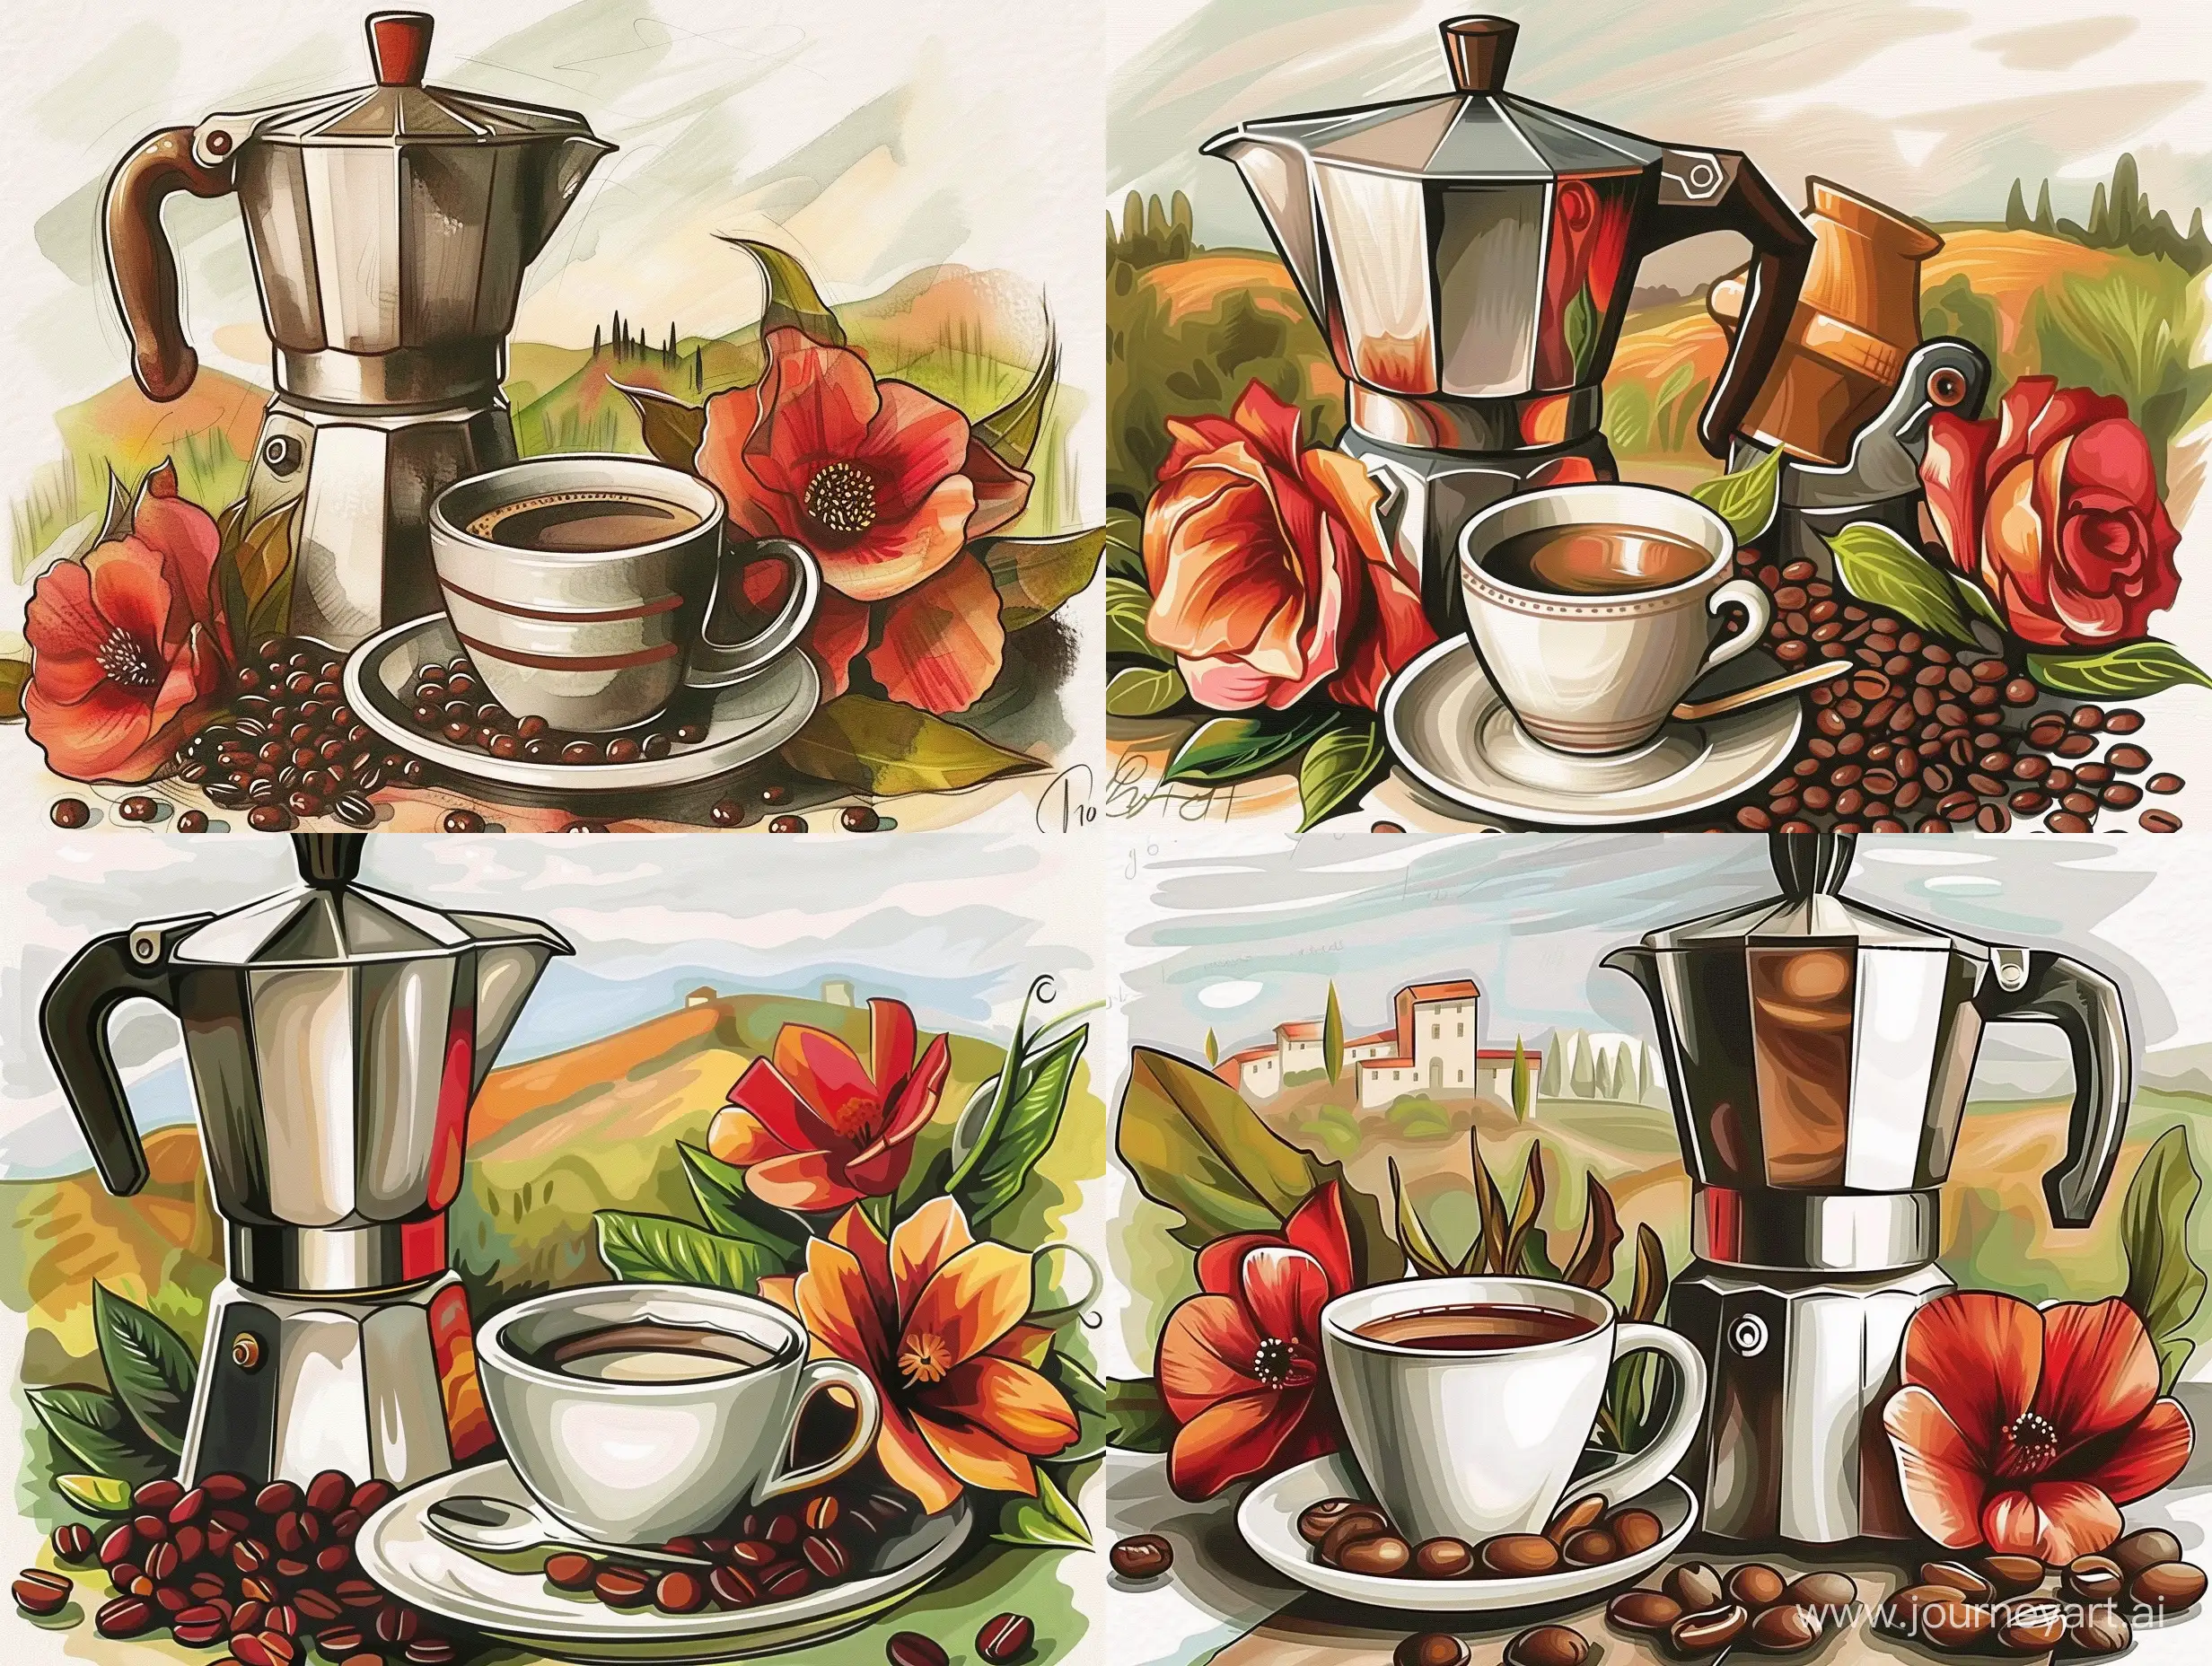 Italian-Landscape-Coffee-Scene-with-Beans-Cup-and-Pot